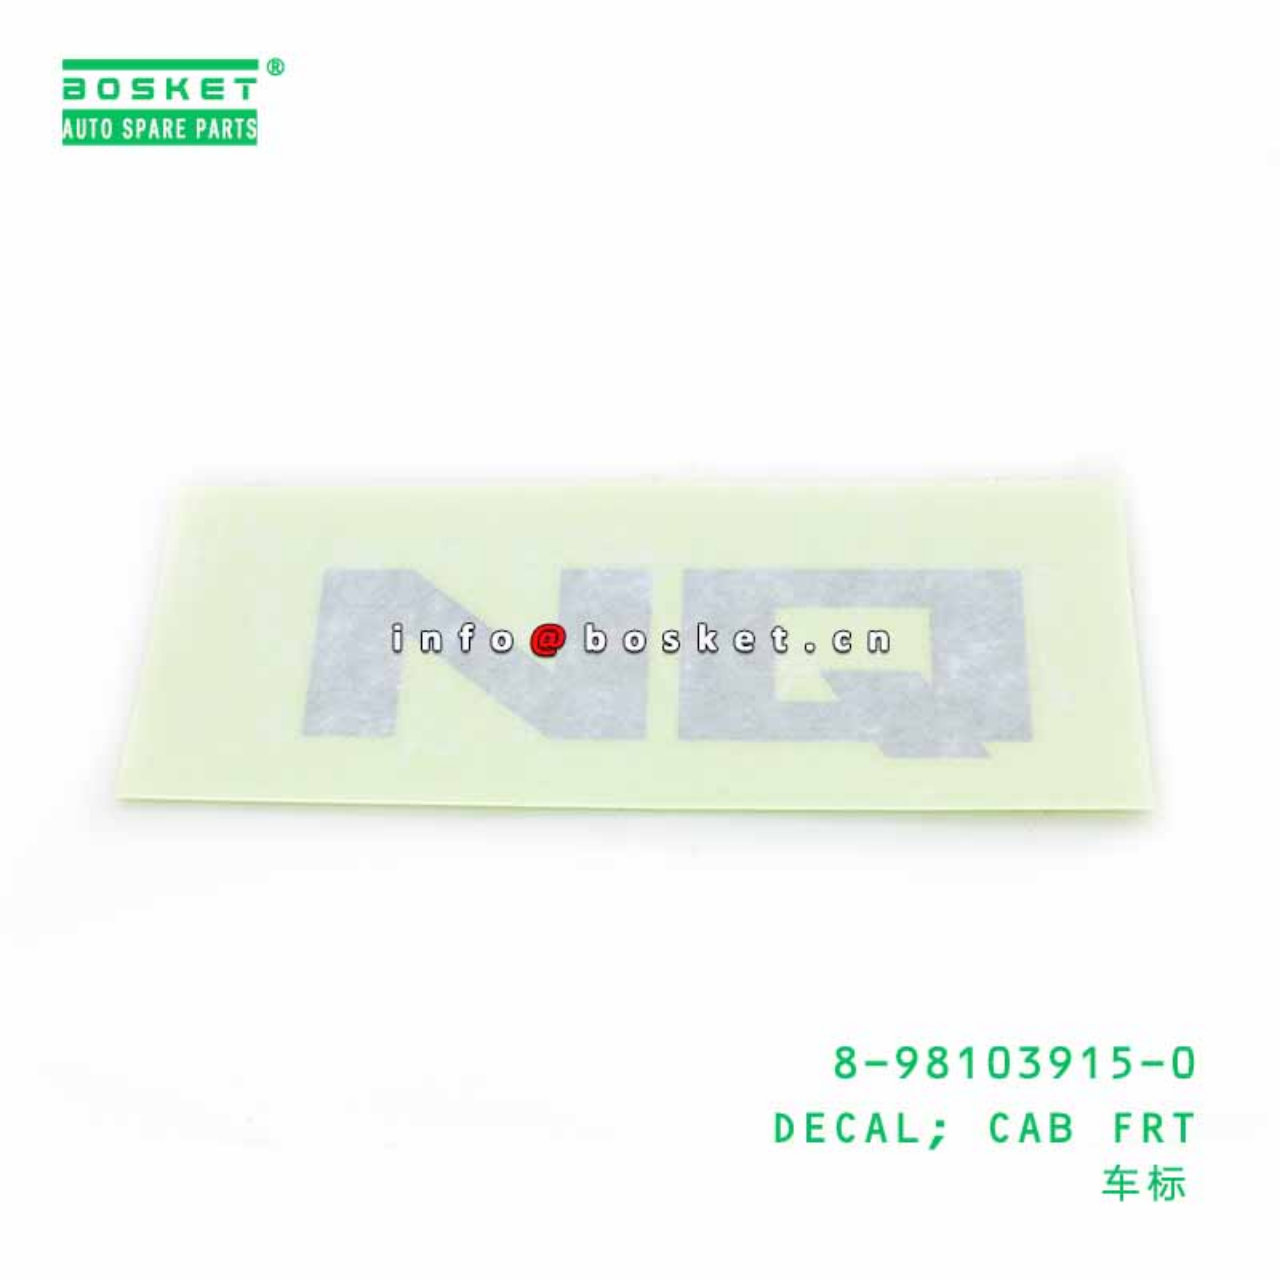 8-98103915-0 8981039150 CAB FRONT DECAL Suitable For ISUZU NQR NPR